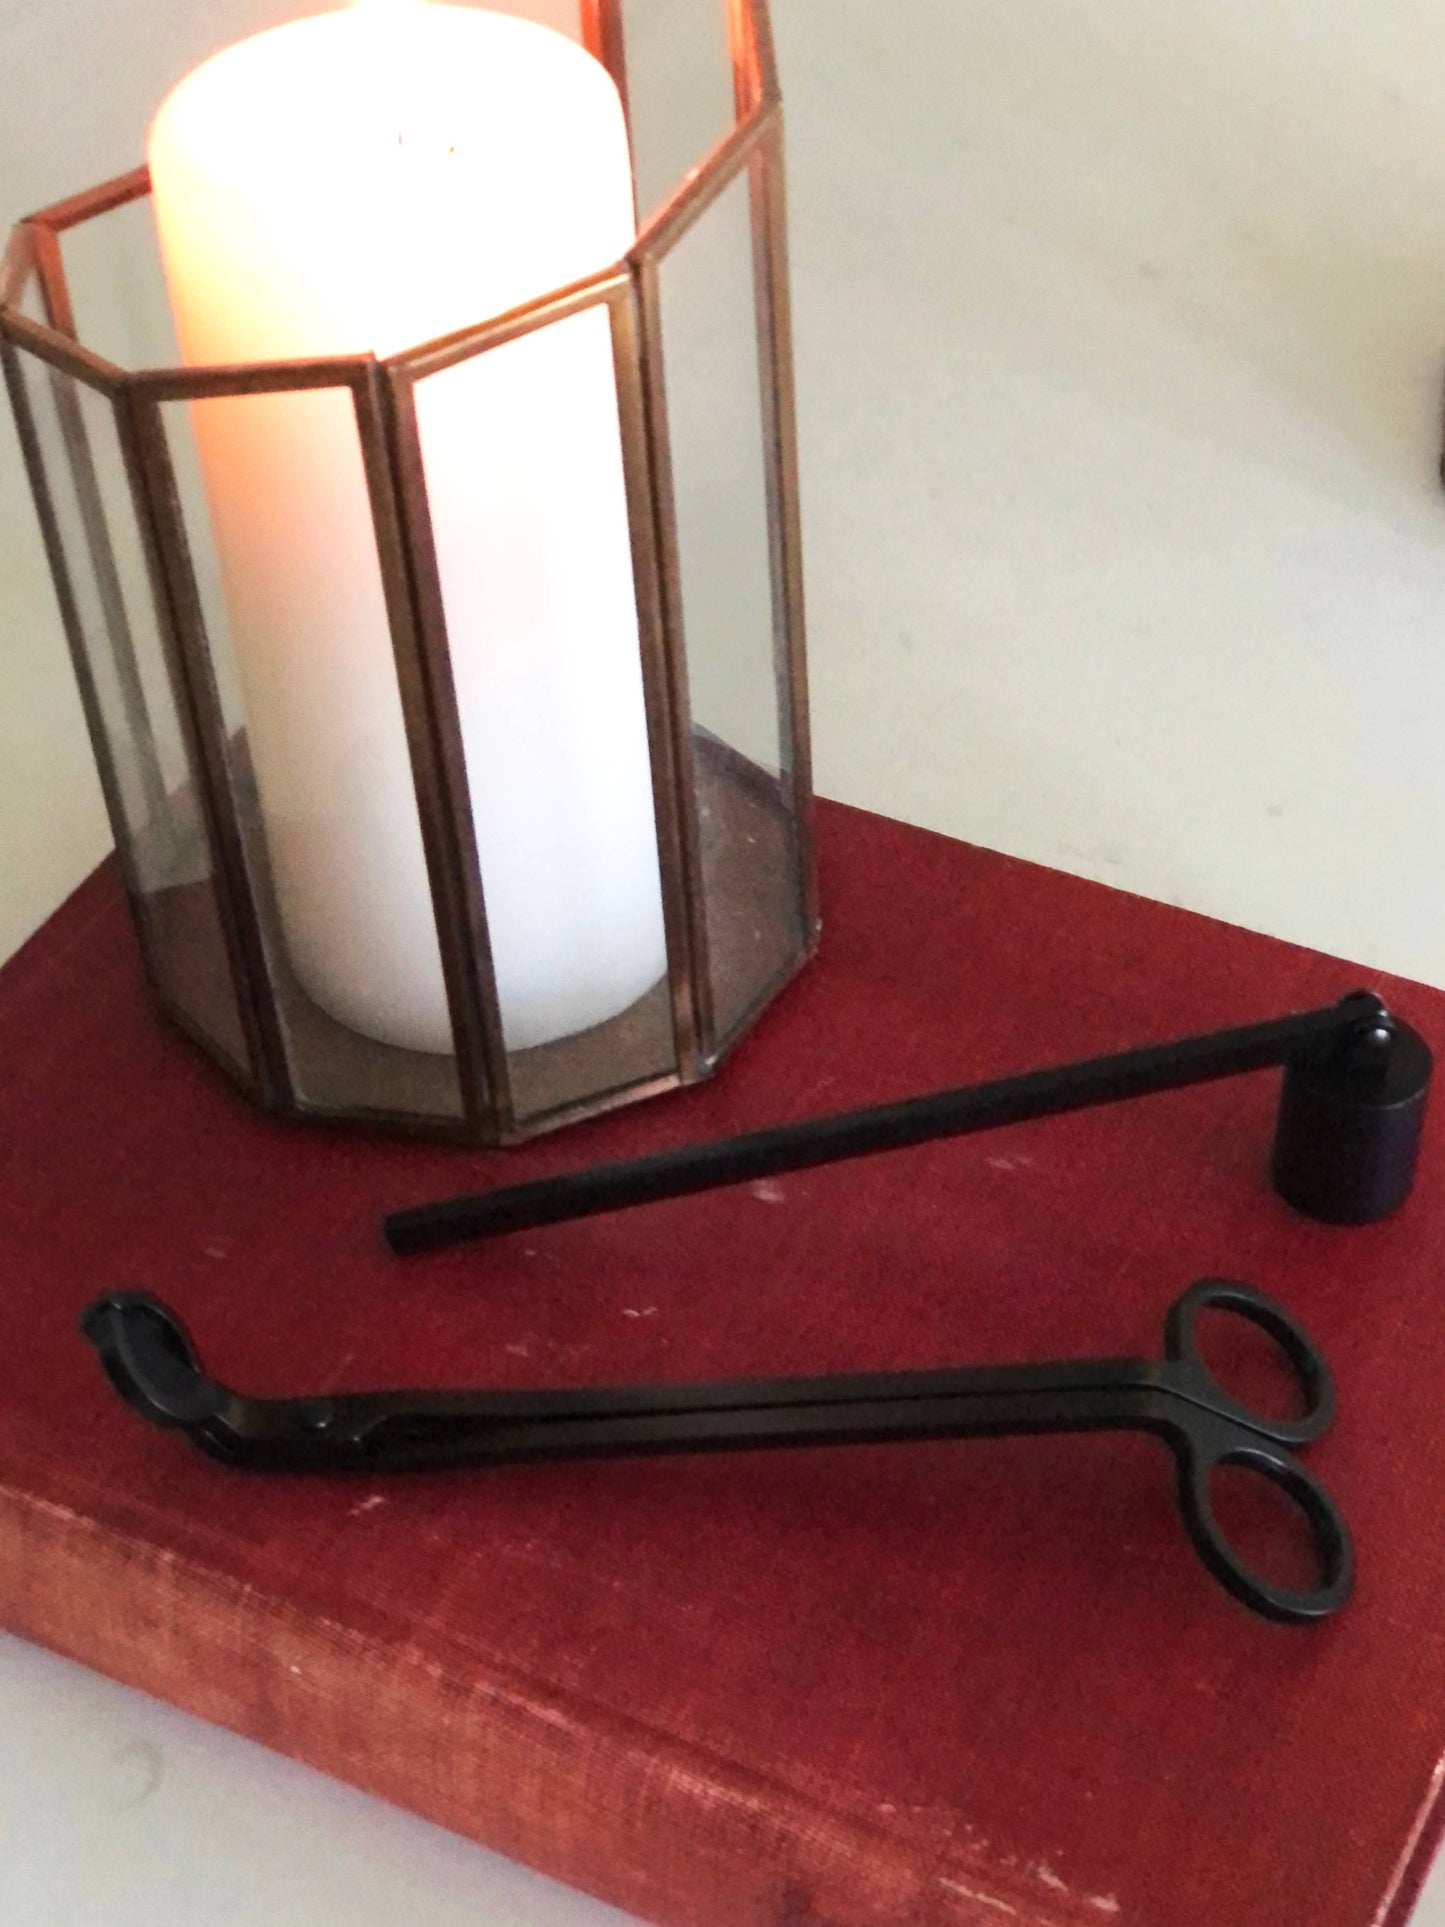 Candle Accessory Kit of